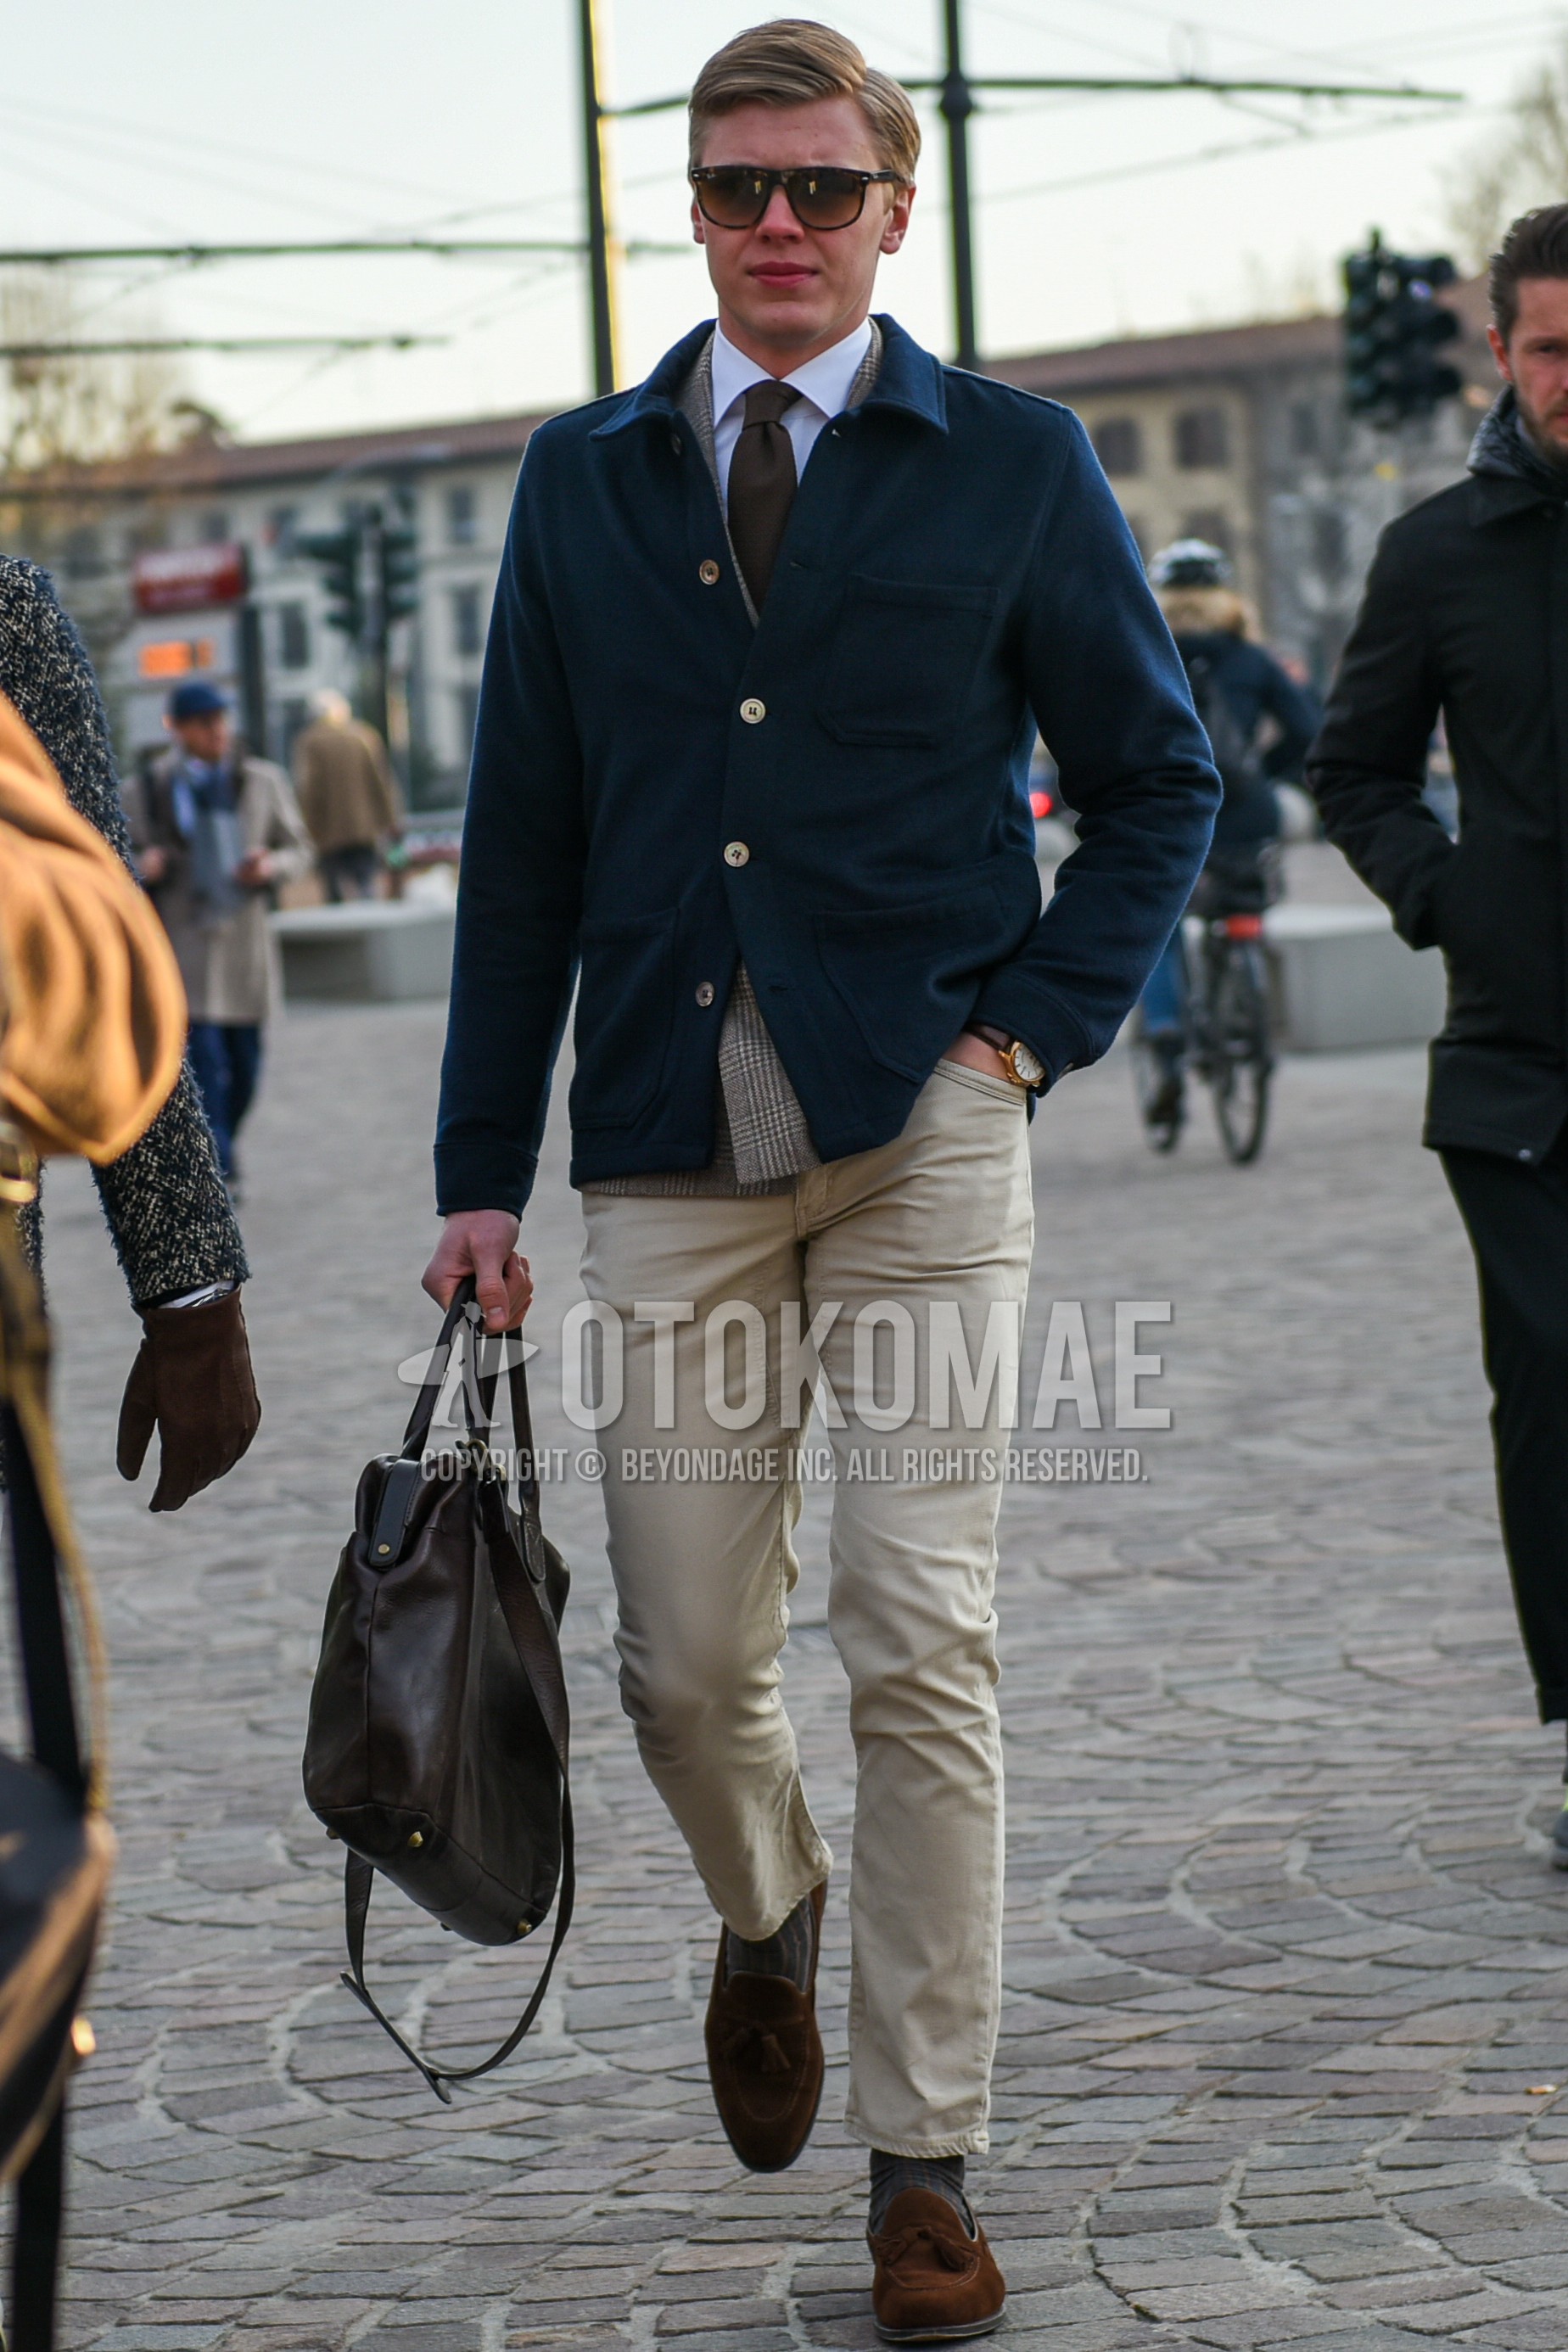 Men's autumn winter outfit with brown tortoiseshell sunglasses, navy plain shirt jacket, gray check tailored jacket, white plain shirt, beige plain chinos, gray plain socks, brown tassel loafers leather shoes, brown plain briefcase/handbag, gray plain necktie.